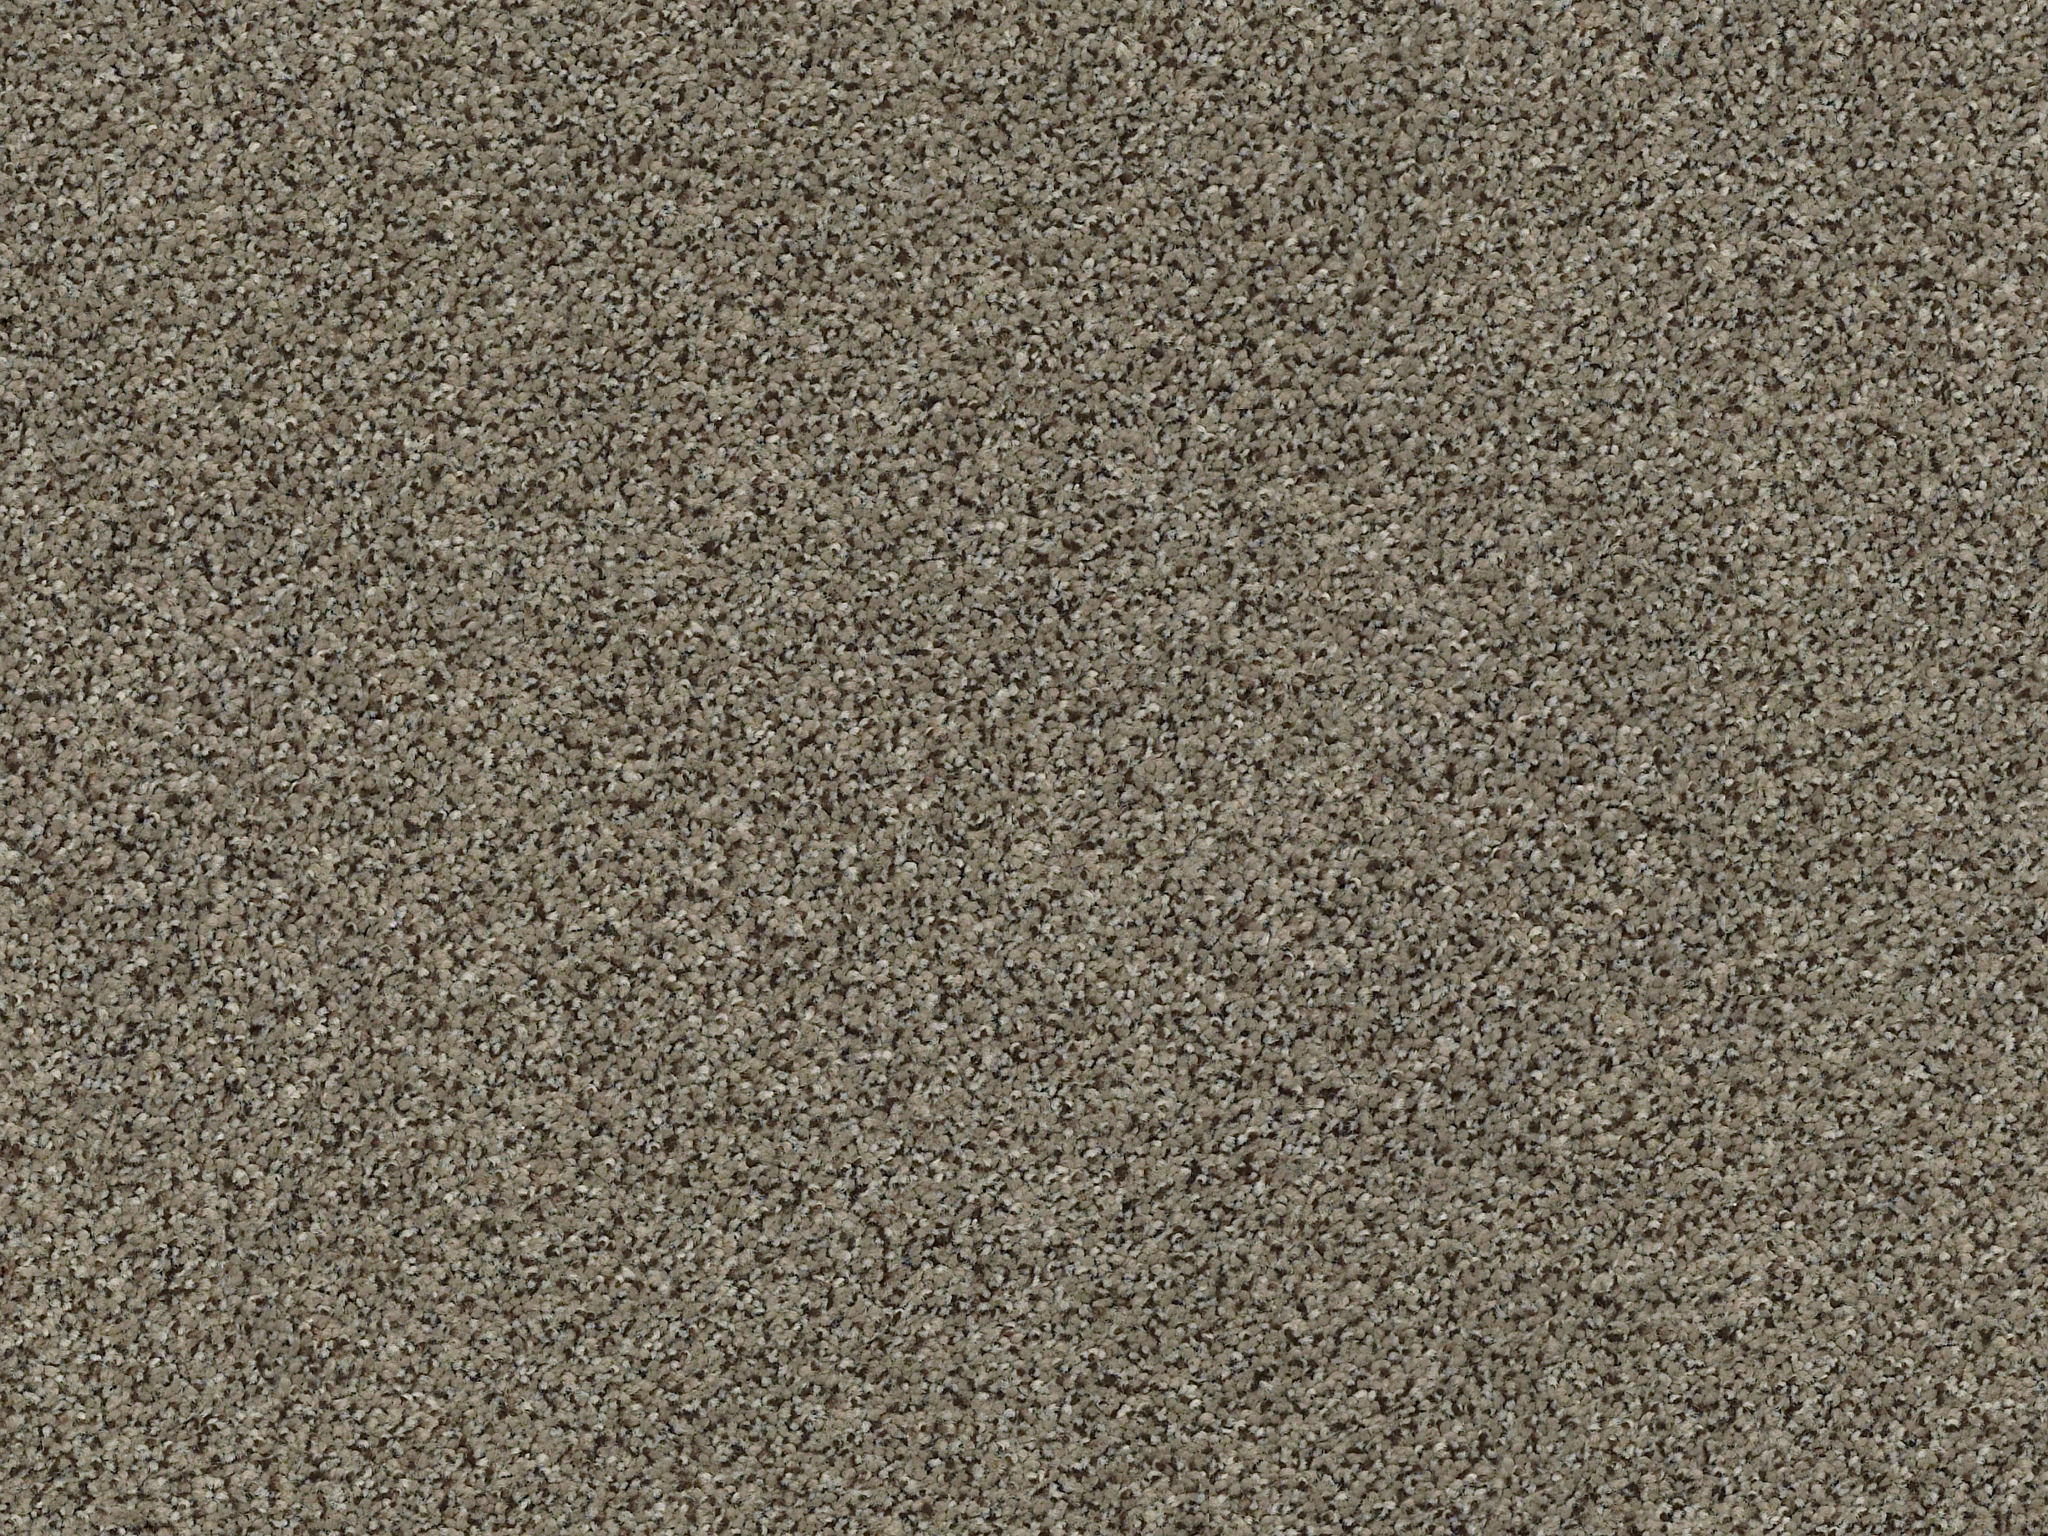 Serenity Cove Carpet - Sleek Suede Zoomed Swatch Image